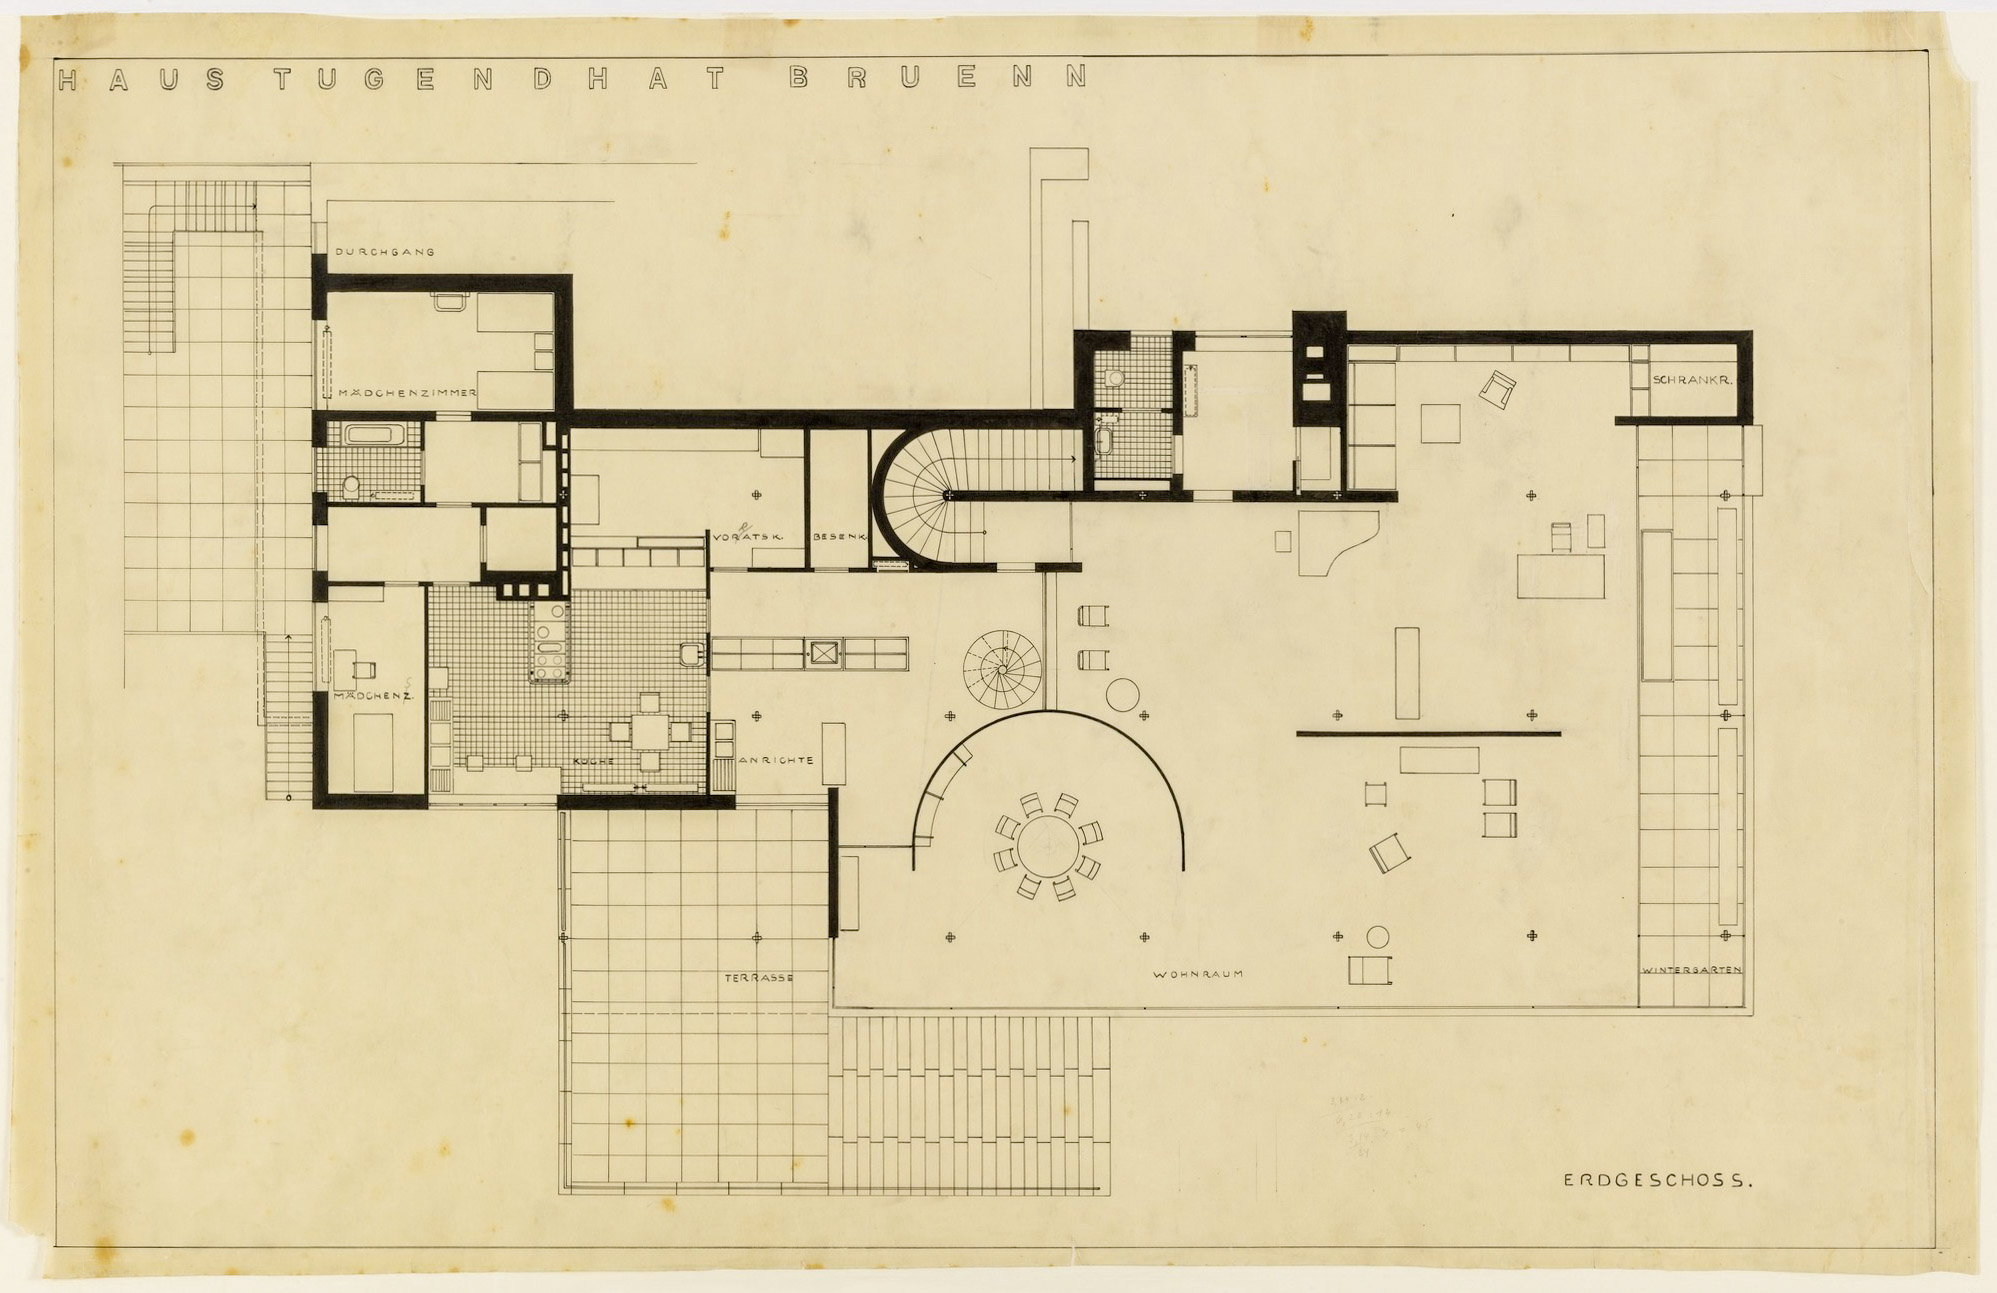 Mies van der Rohe, Tugendhat House. Ground floor plan drawing. Ink and pencil on tracing paper, 62.2 x 97.8 cm, Collection Museum of Modern Art, New York. https://www.moma.org/collection/works/89535